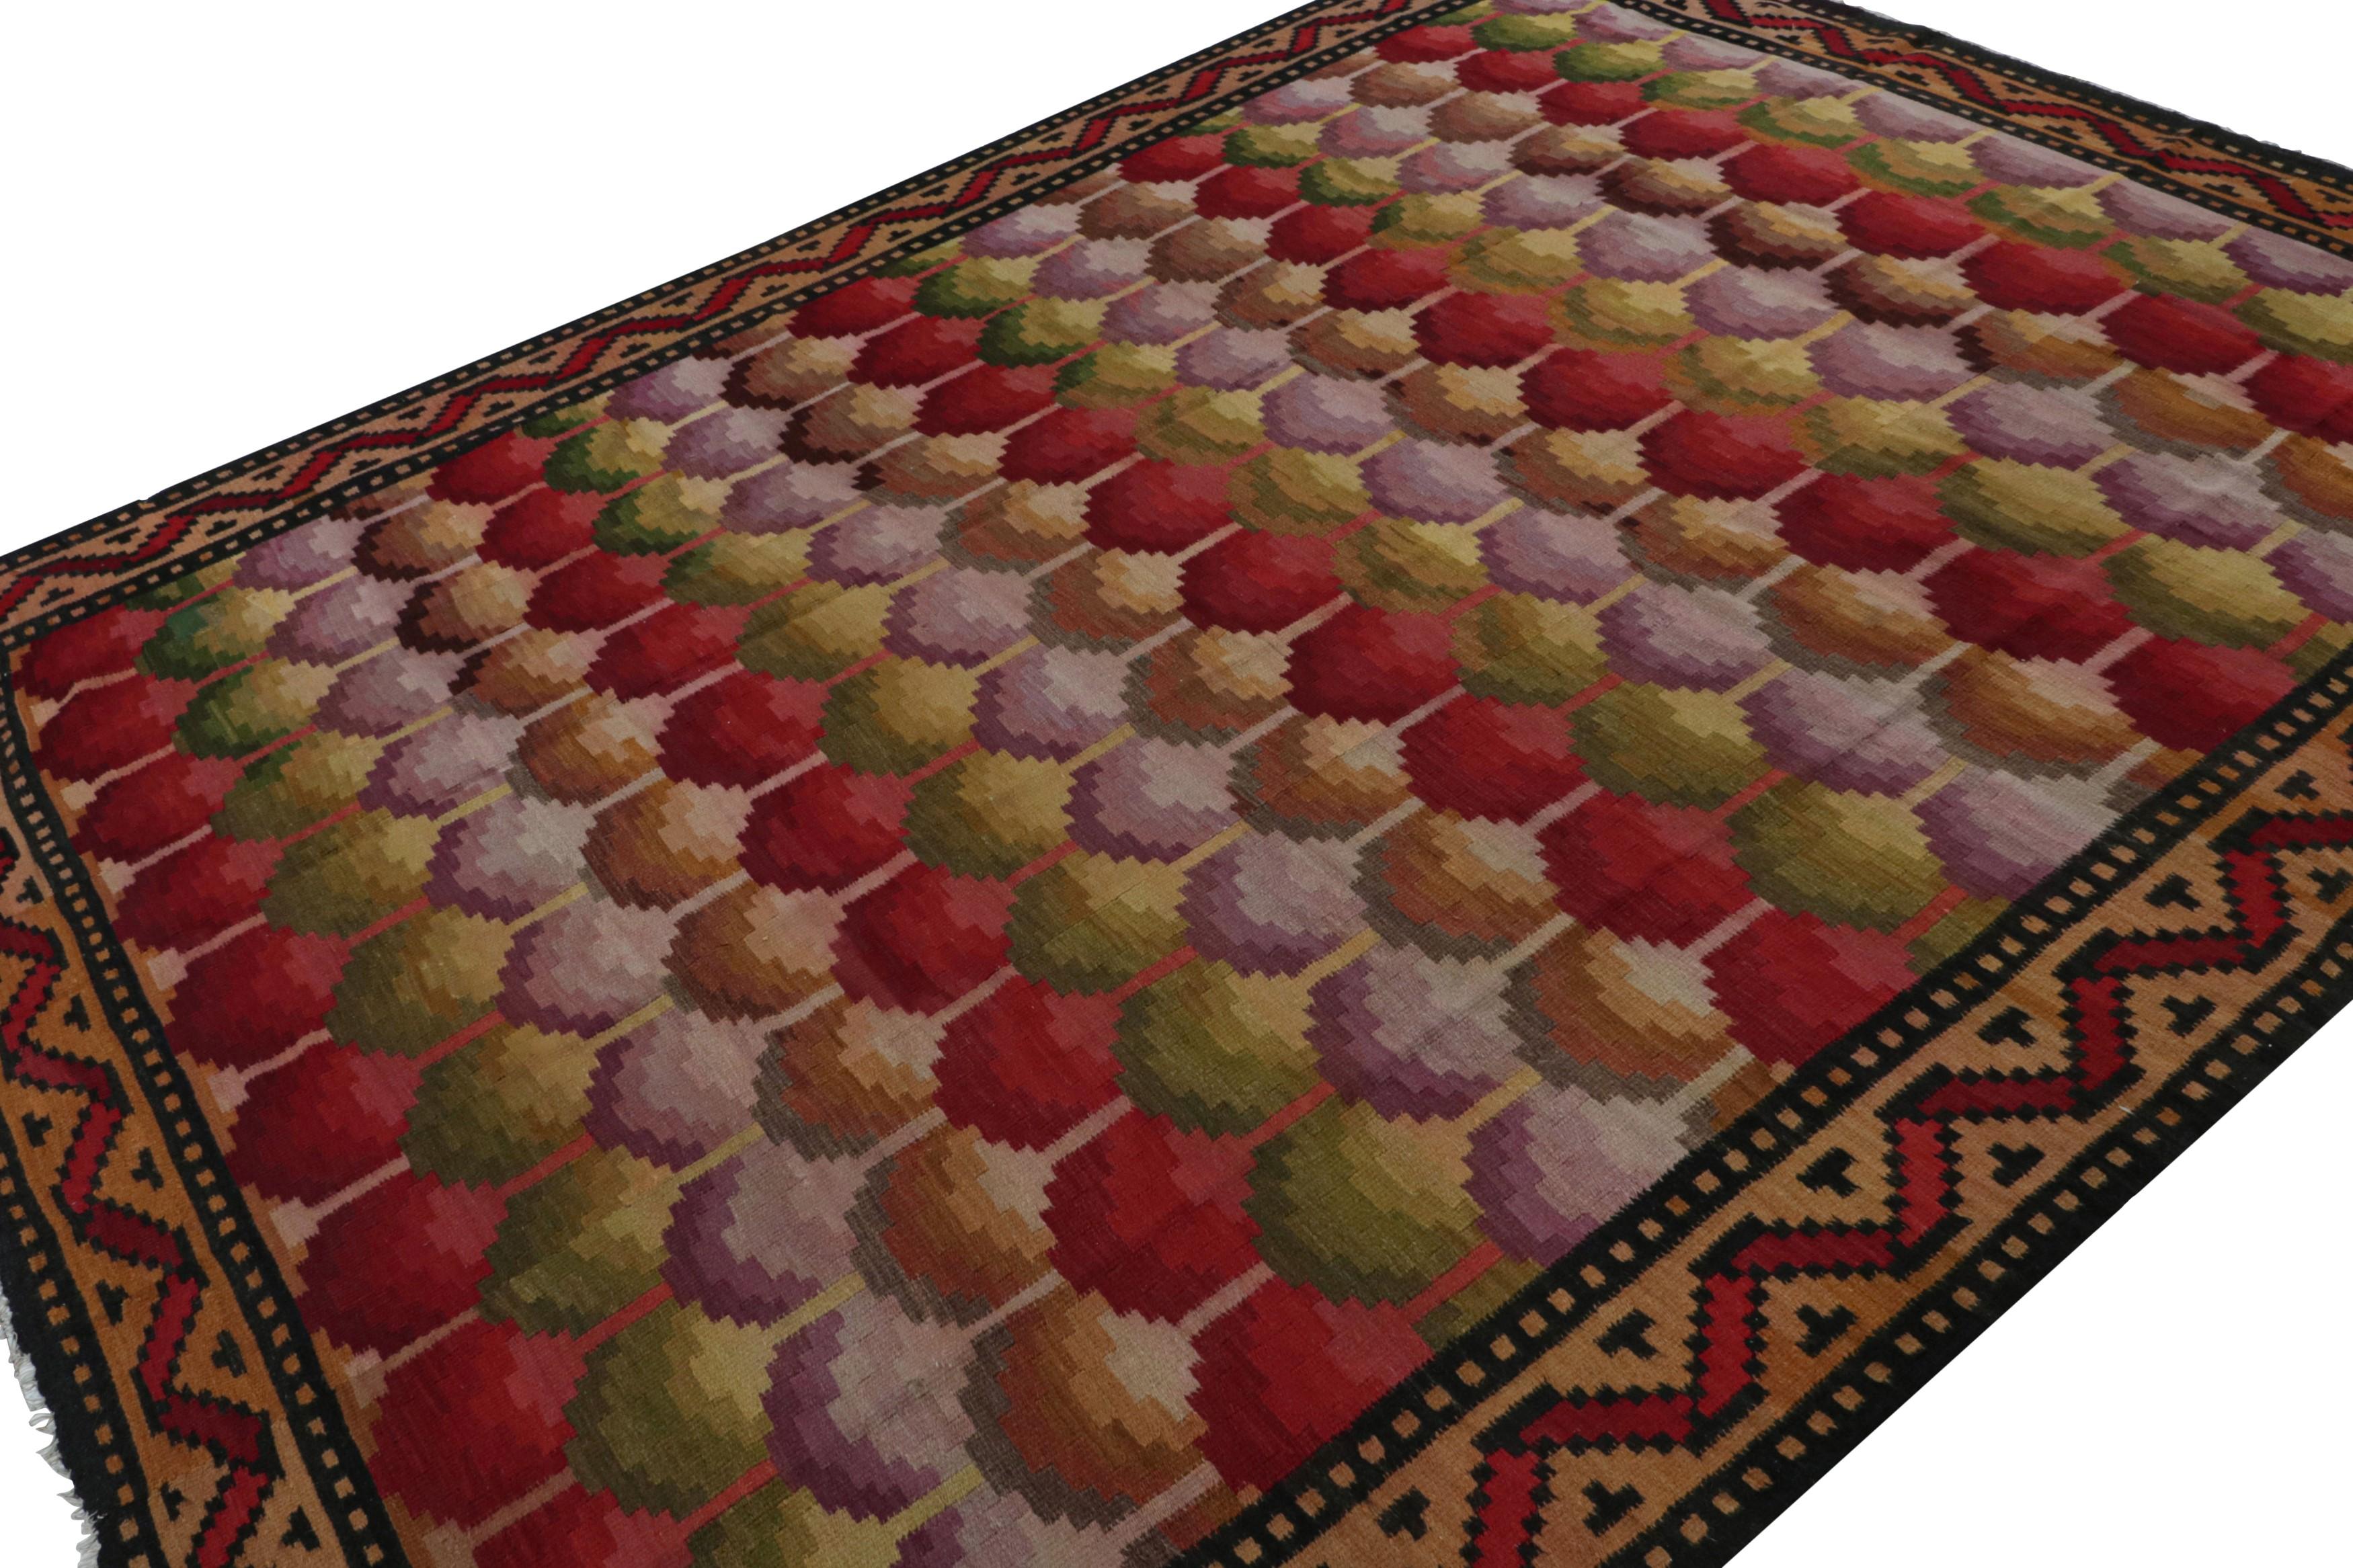 Handwoven in wool, circa 1950-1960, this 9x11 vintage kilim is believed to originate from Turkey and its design is a rare one with some elements of Balkan design. 

On the Design: 

Its colorway is a rich range of red, chartreuse green, brown and